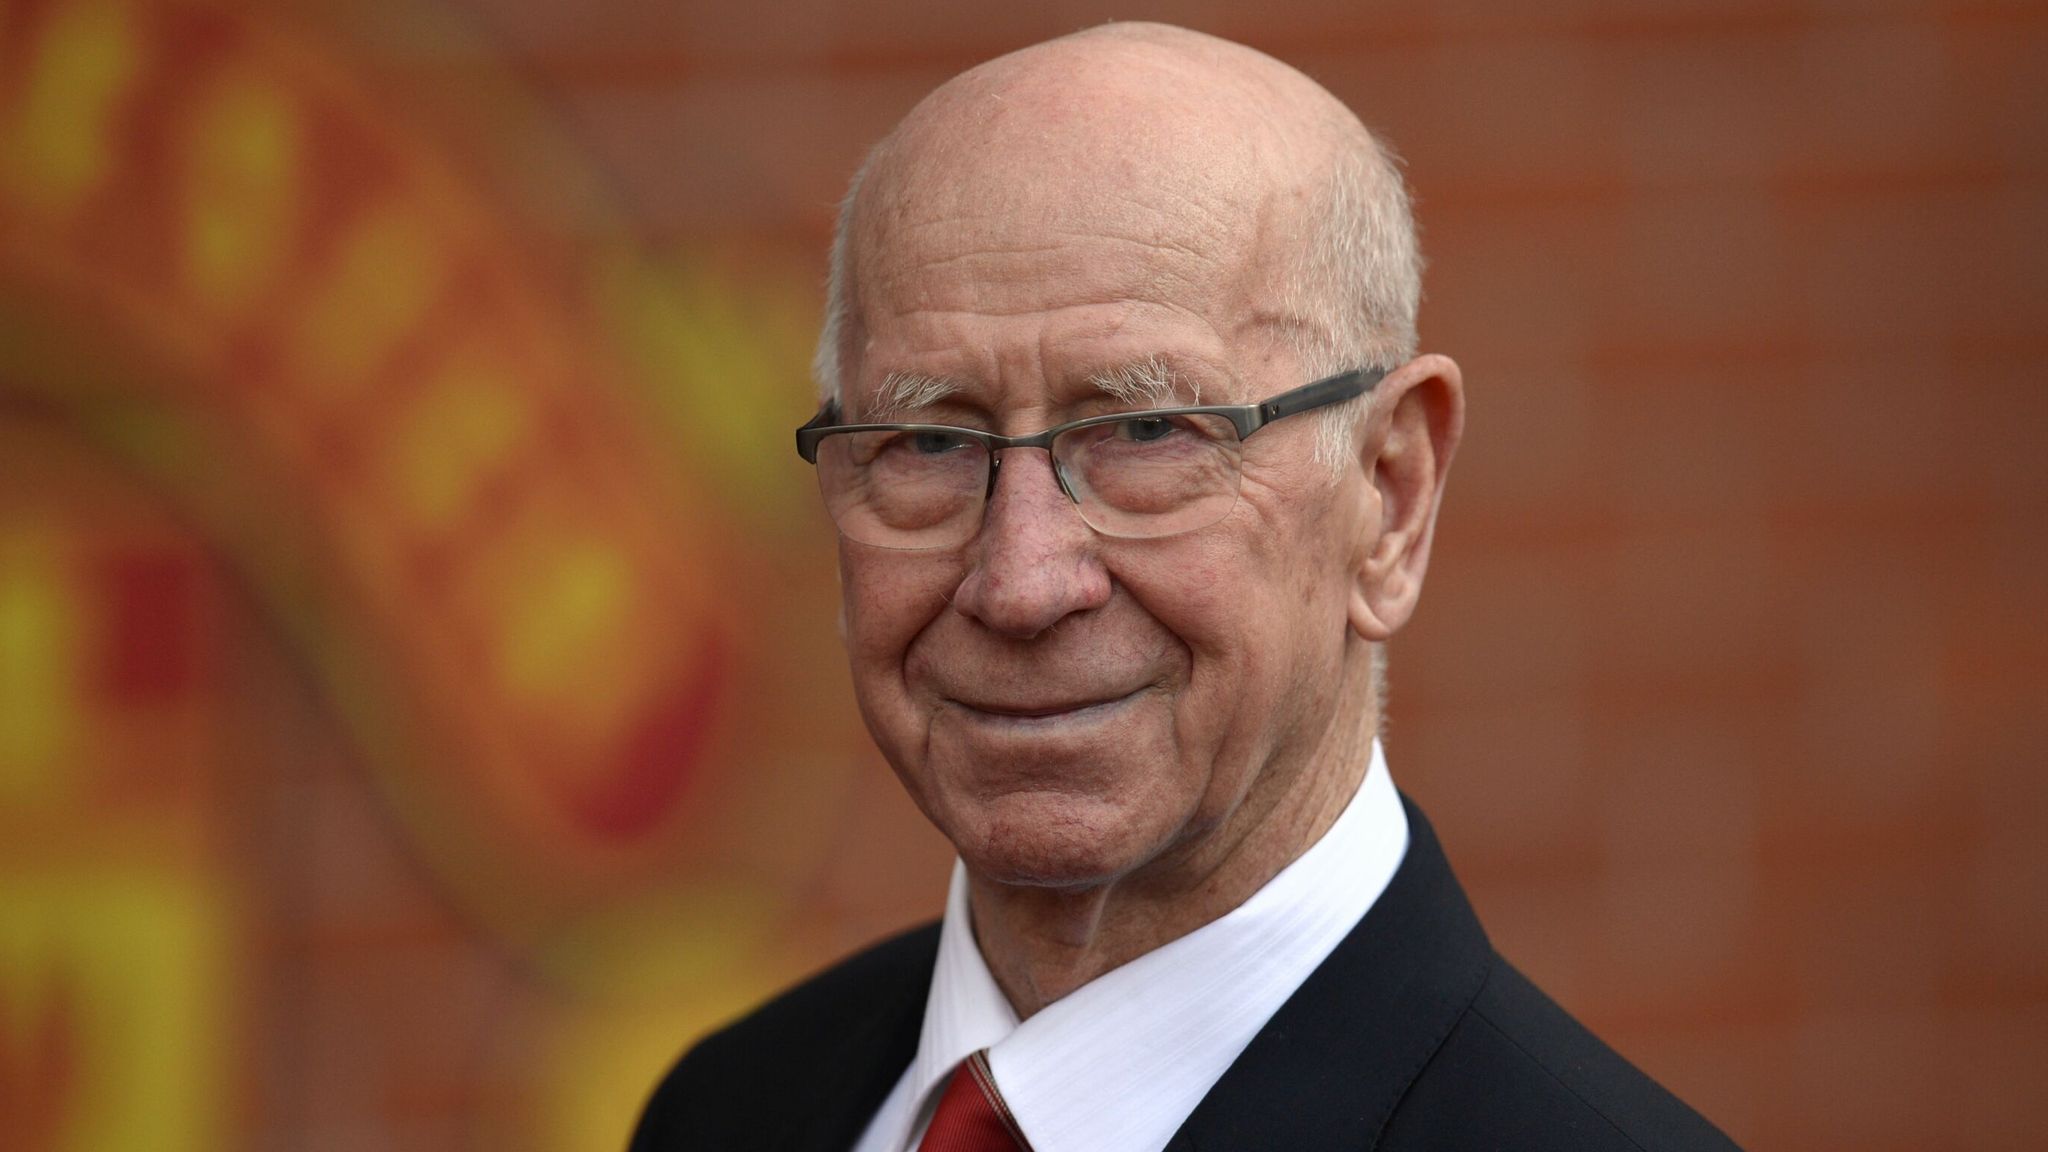 Sir Bobby Charlton England 1966 World Cup Hero And Manchester United Legend Has Dementia Fa 